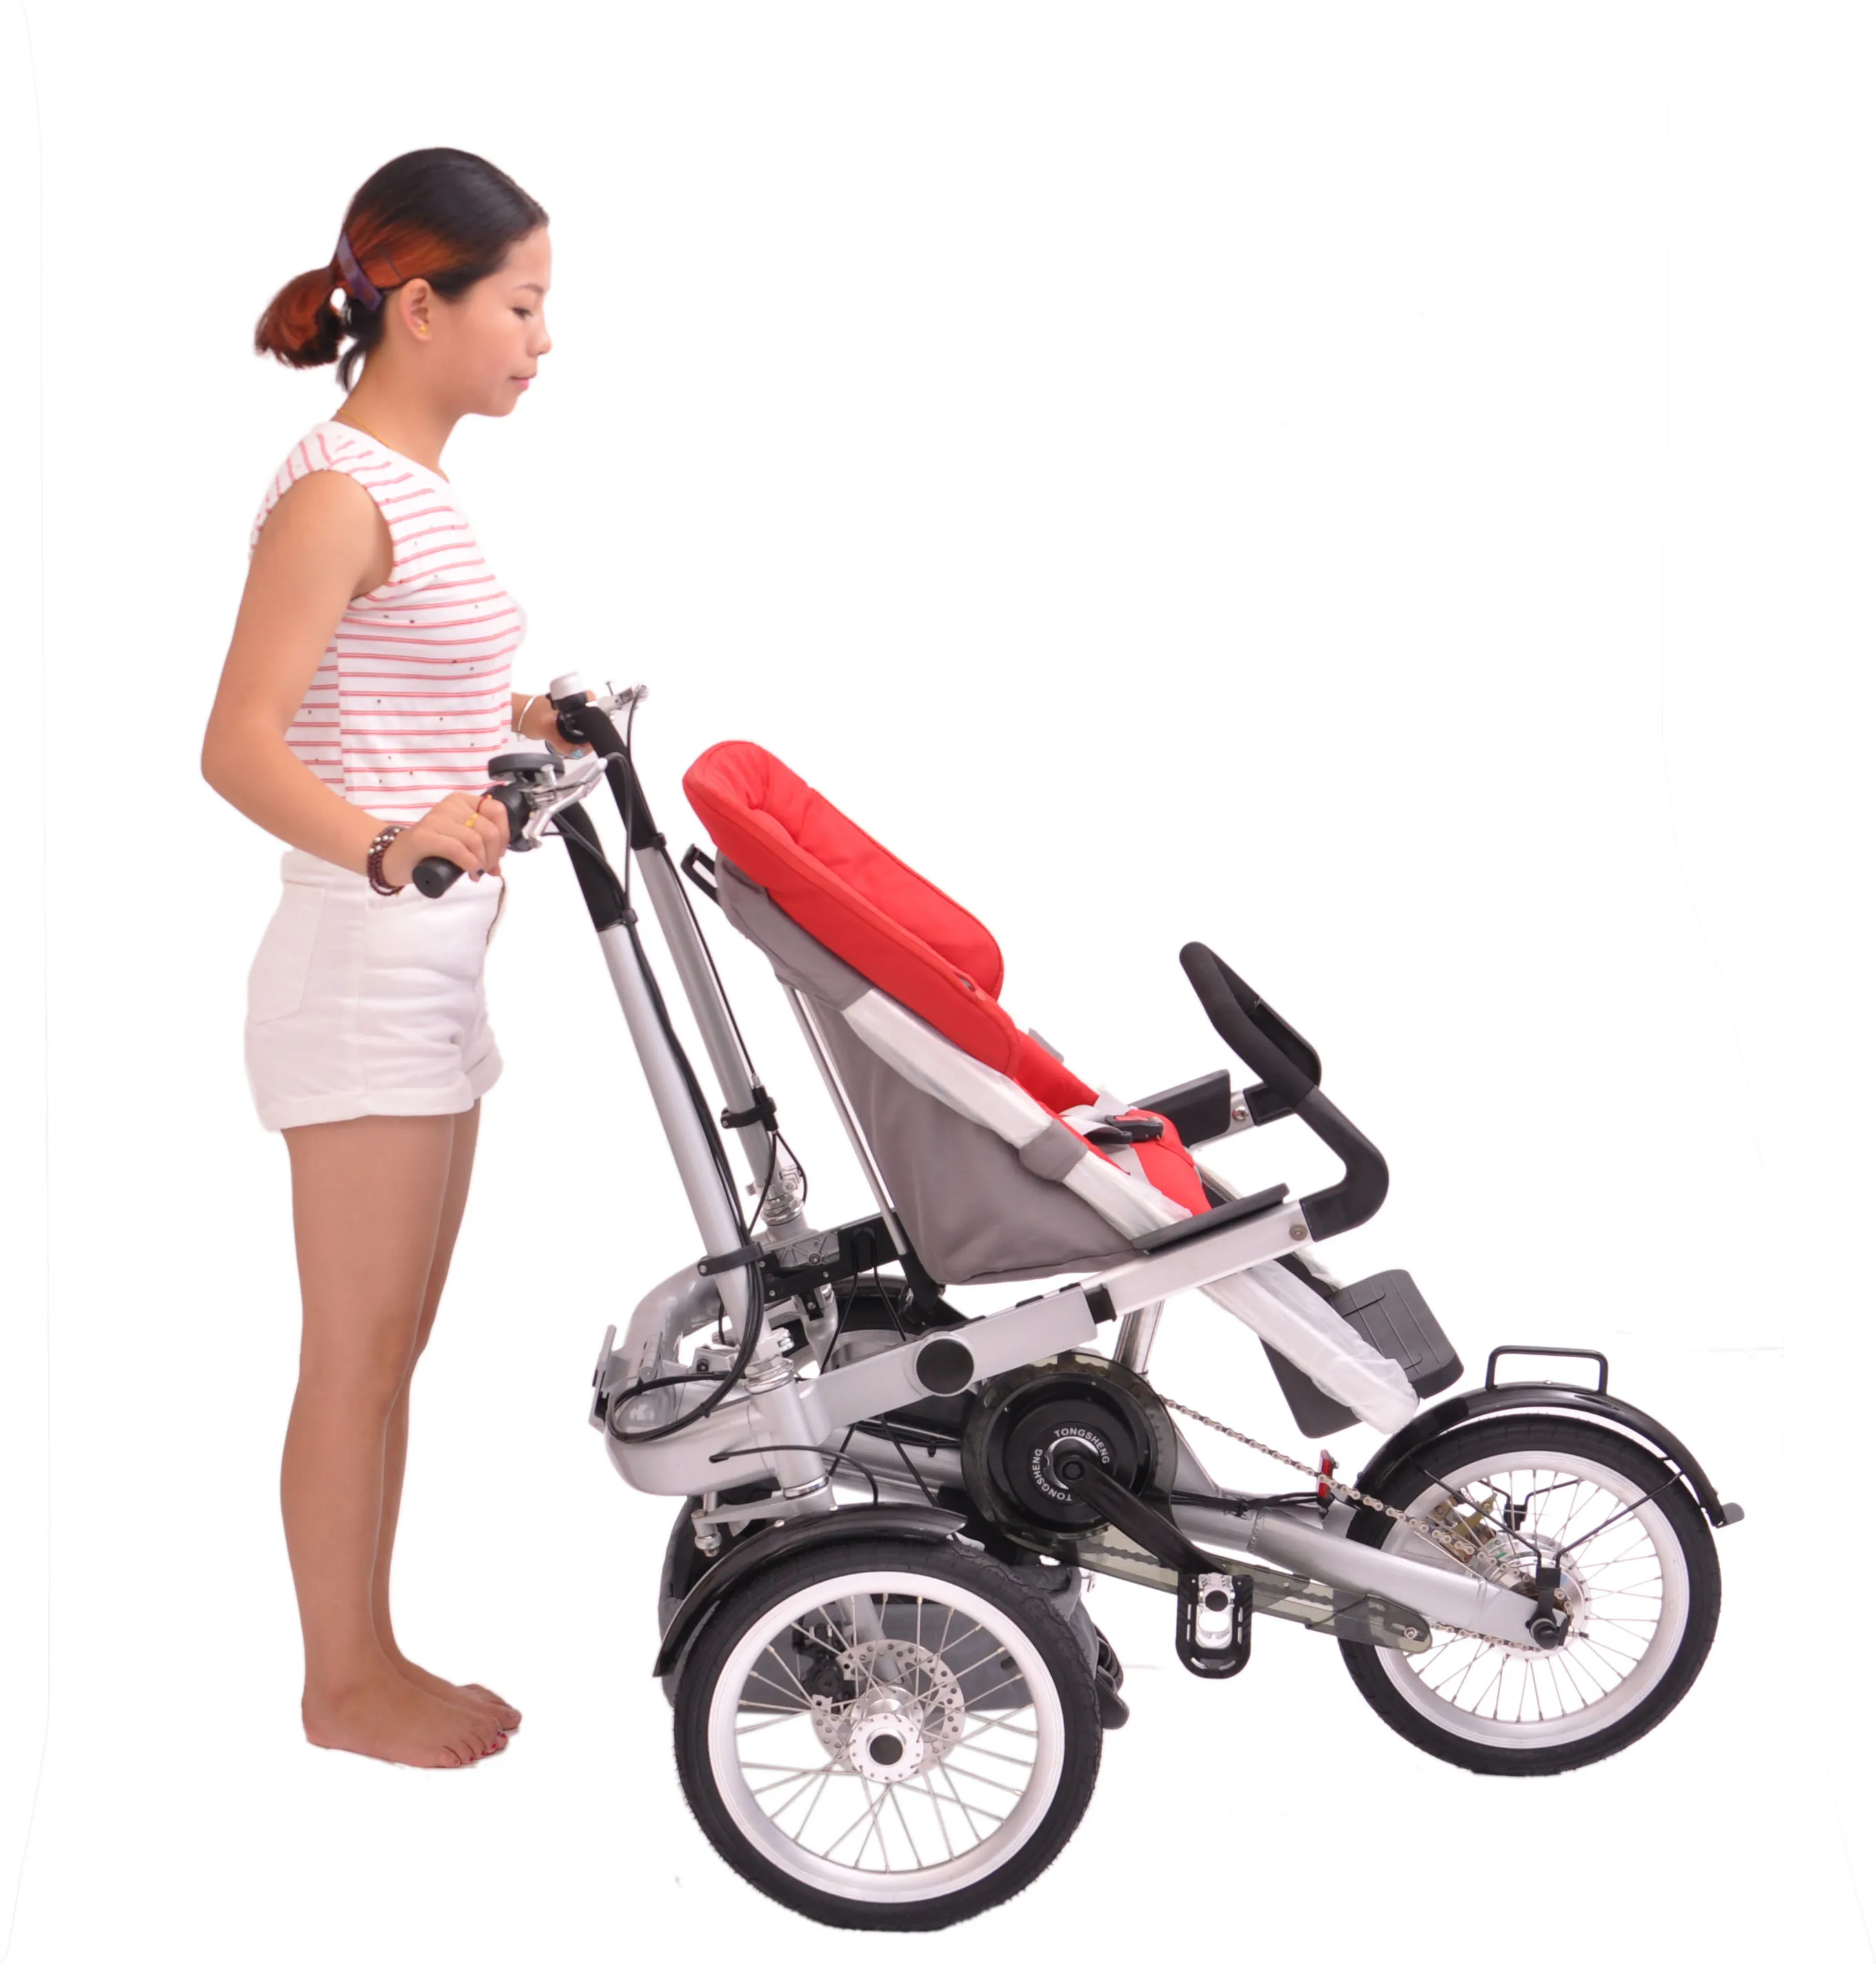 motorized baby carriage